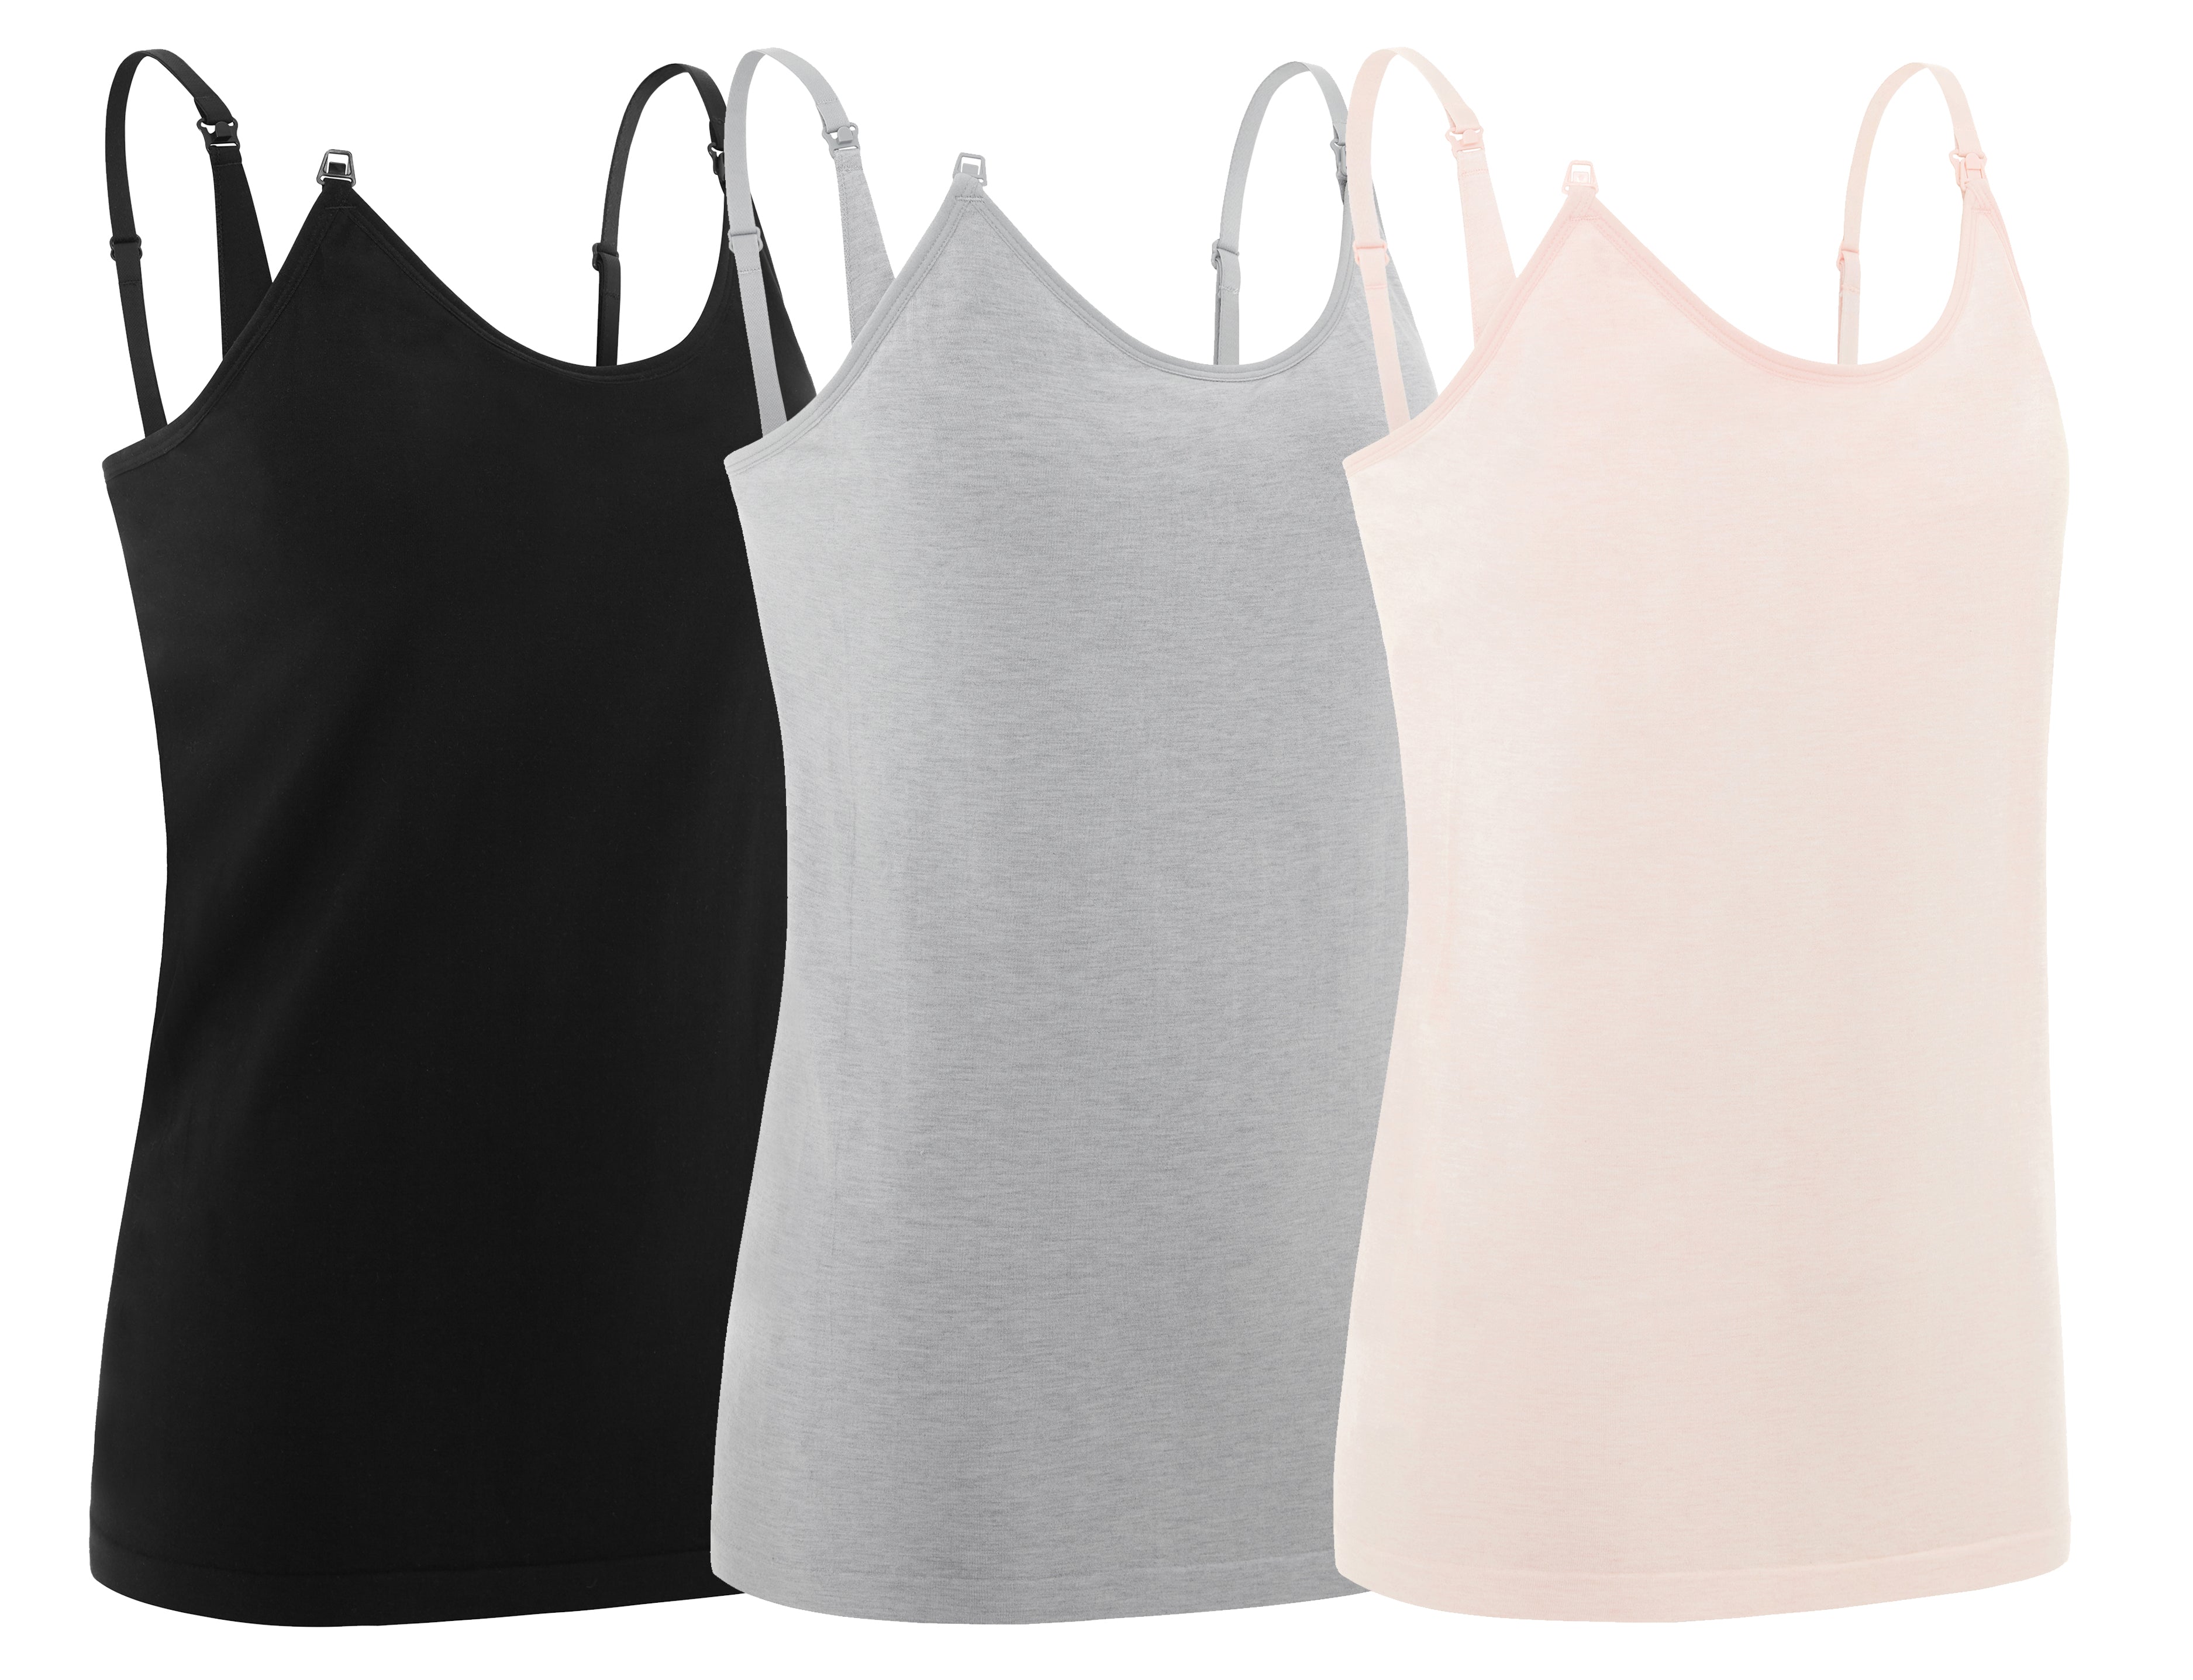 Under Camisole |Maternity Pack 3 (Black/Grey/Pink) Control